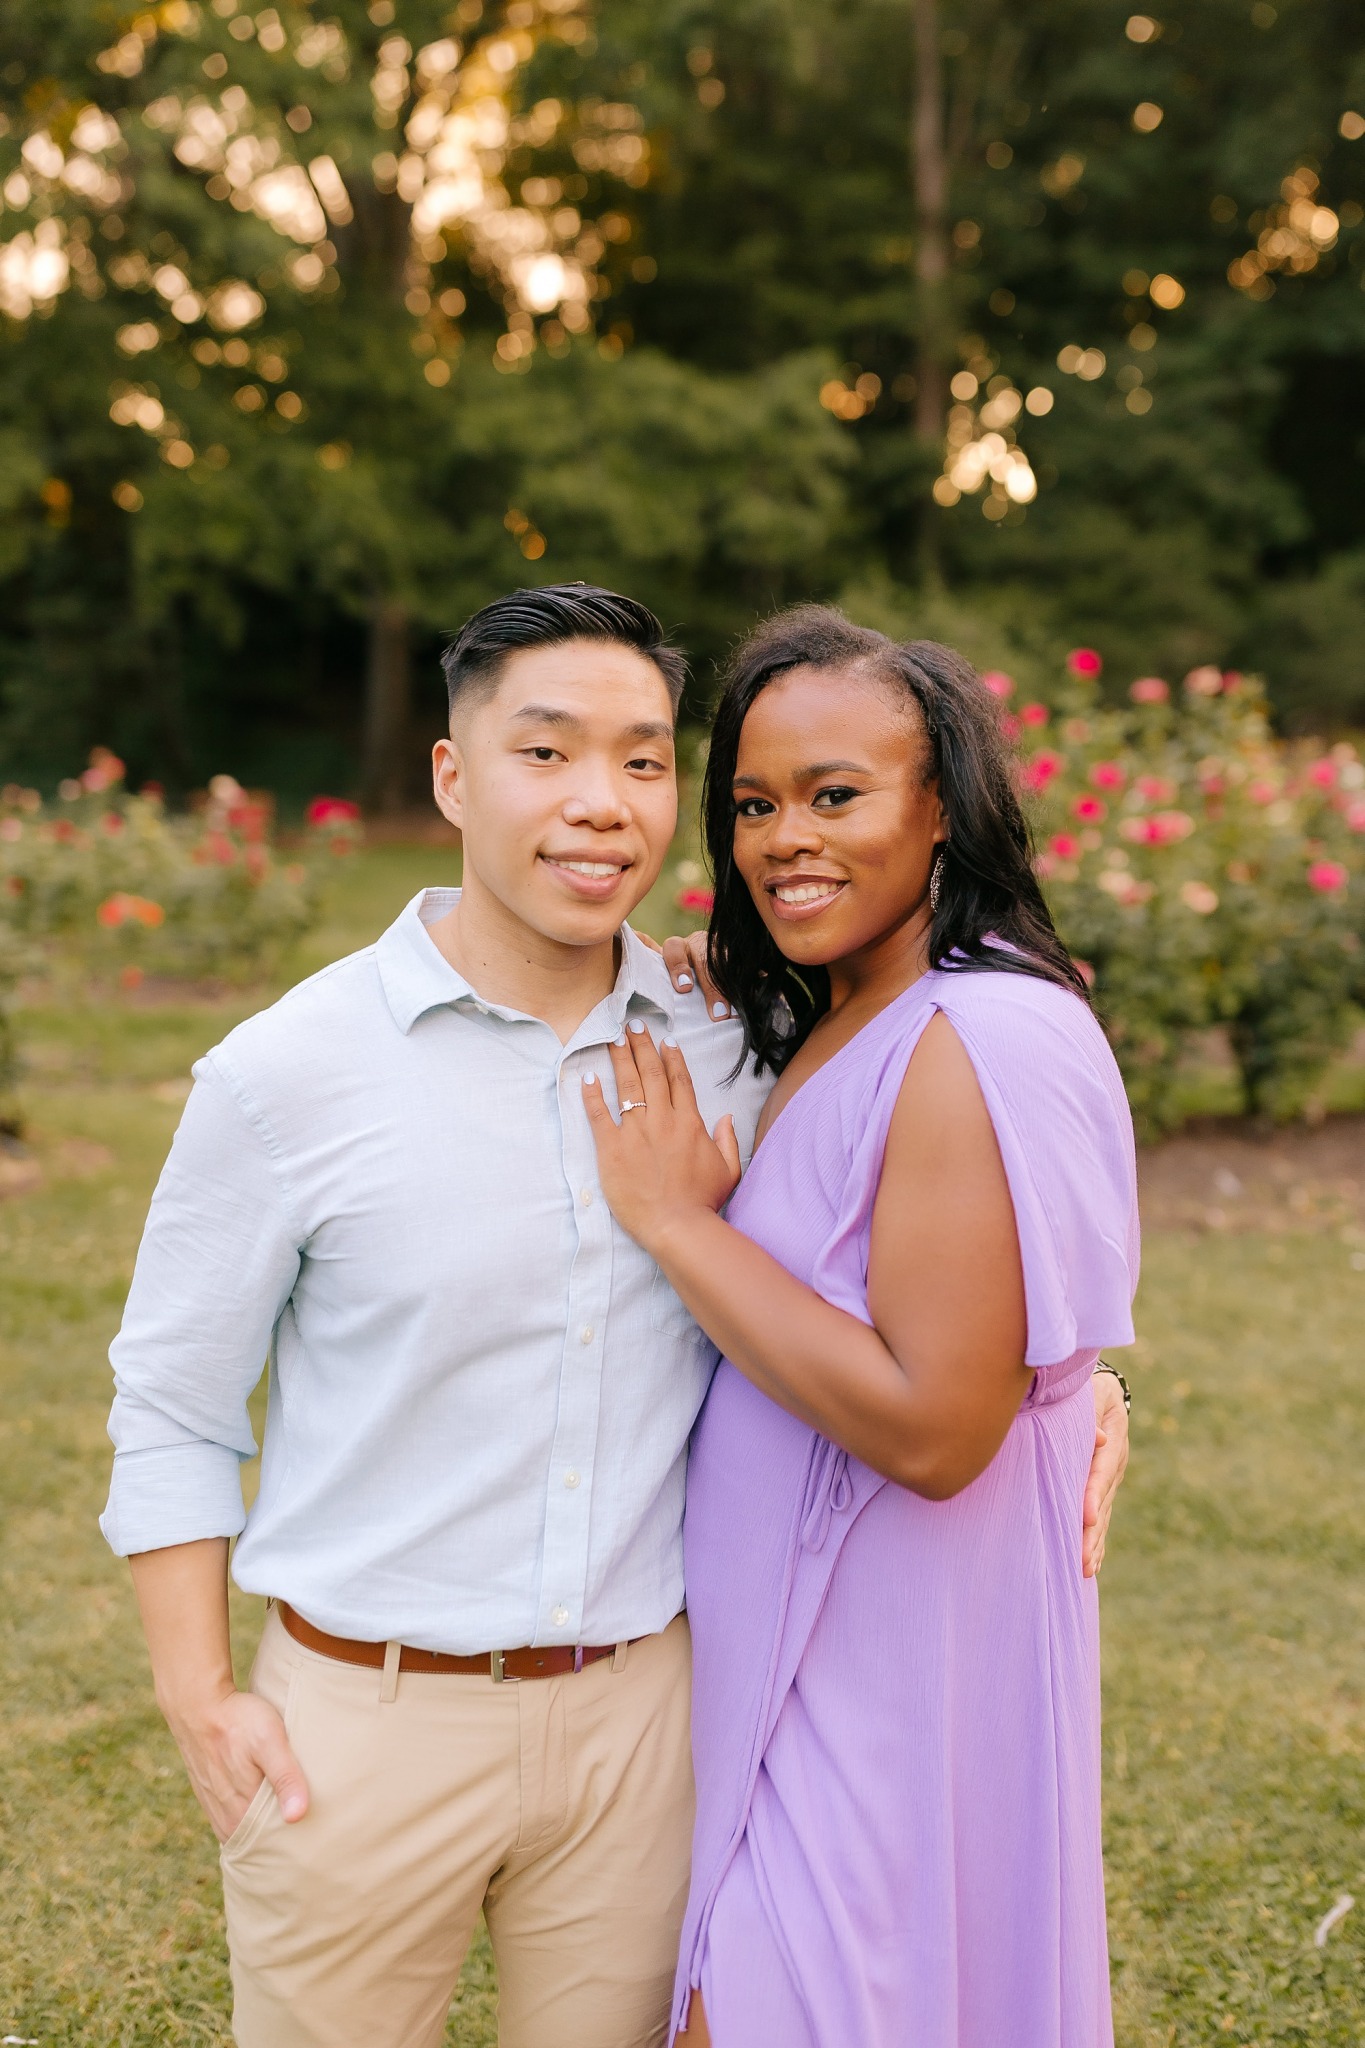 rose garden engagement portraits with Chelsea Renay